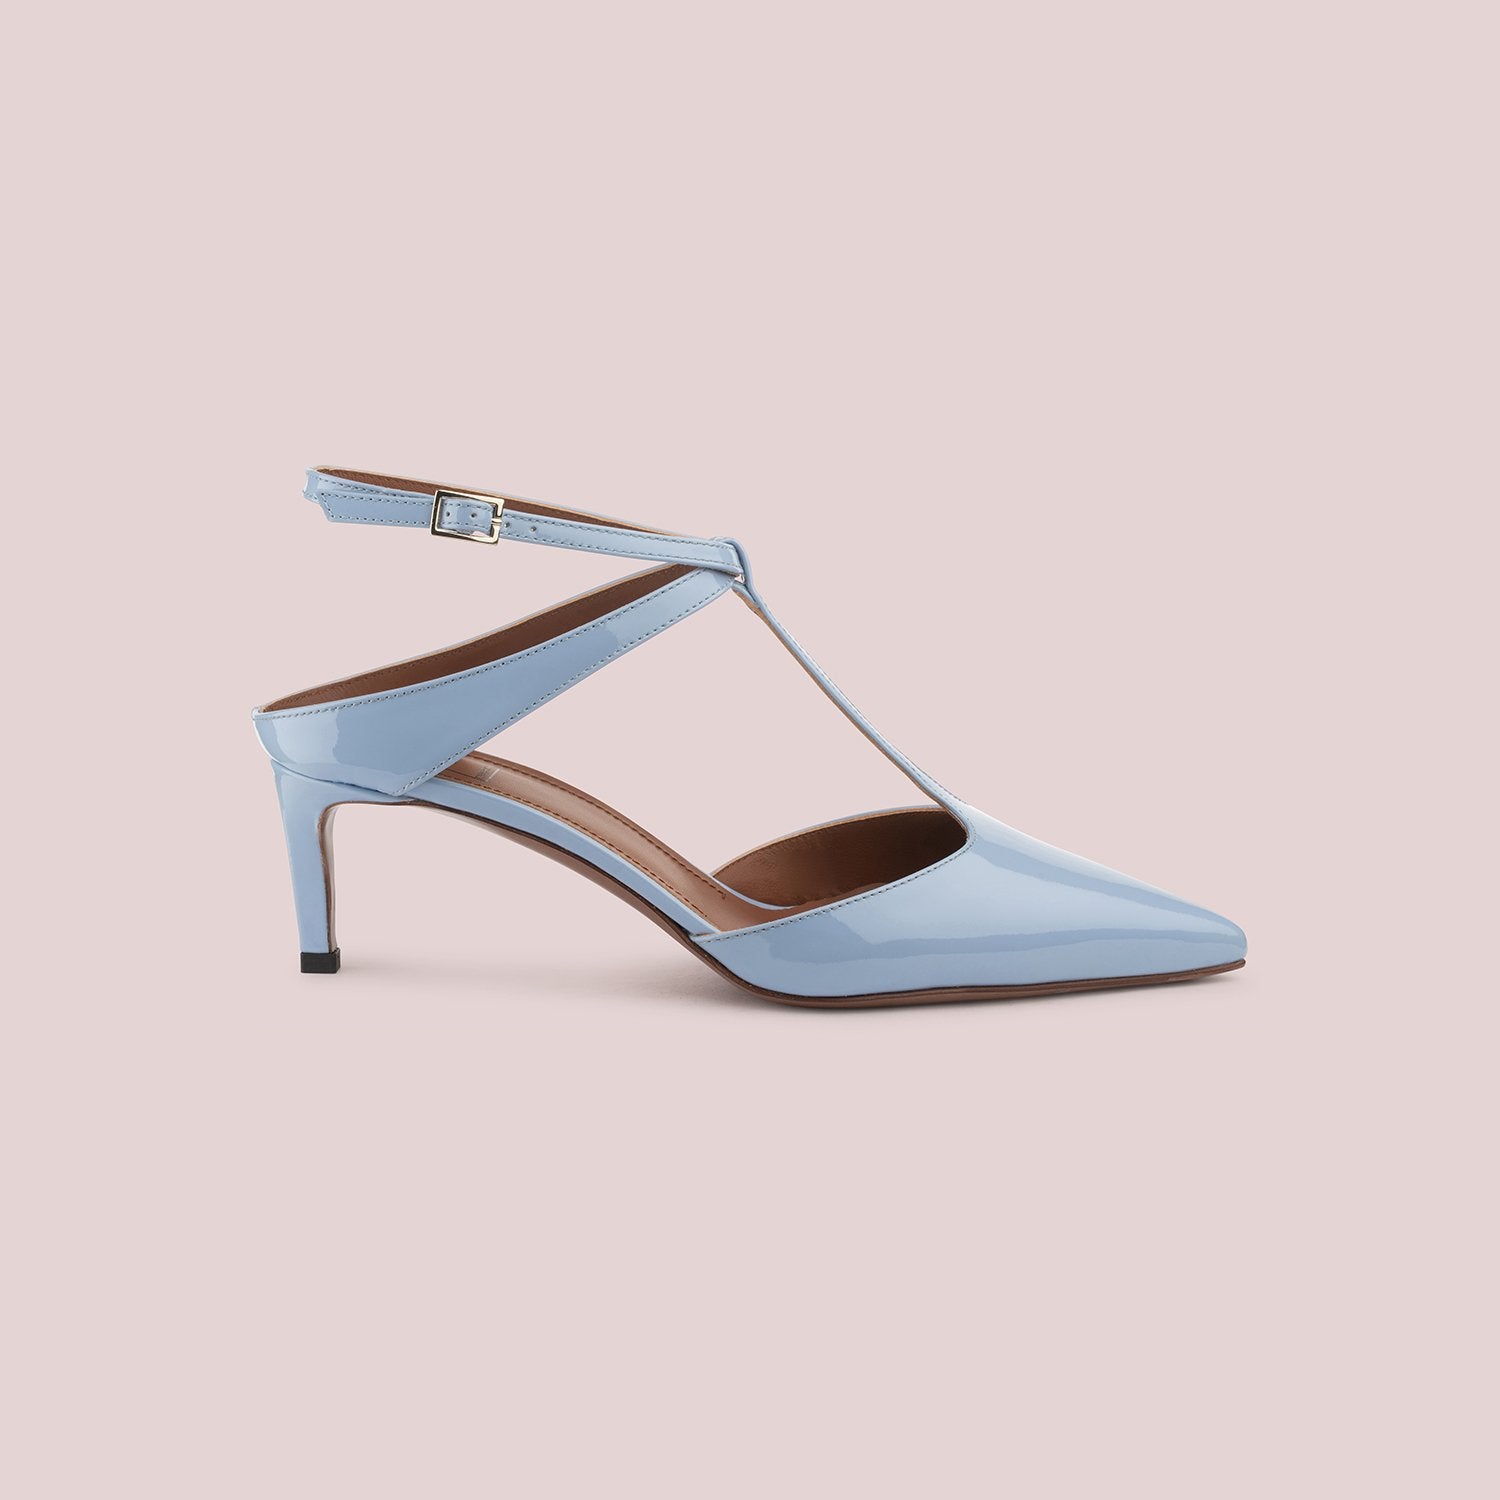 T-Bar Court Shoes In Sky Blue Patent Leather Heels LDL052.55CP00417093 - 5